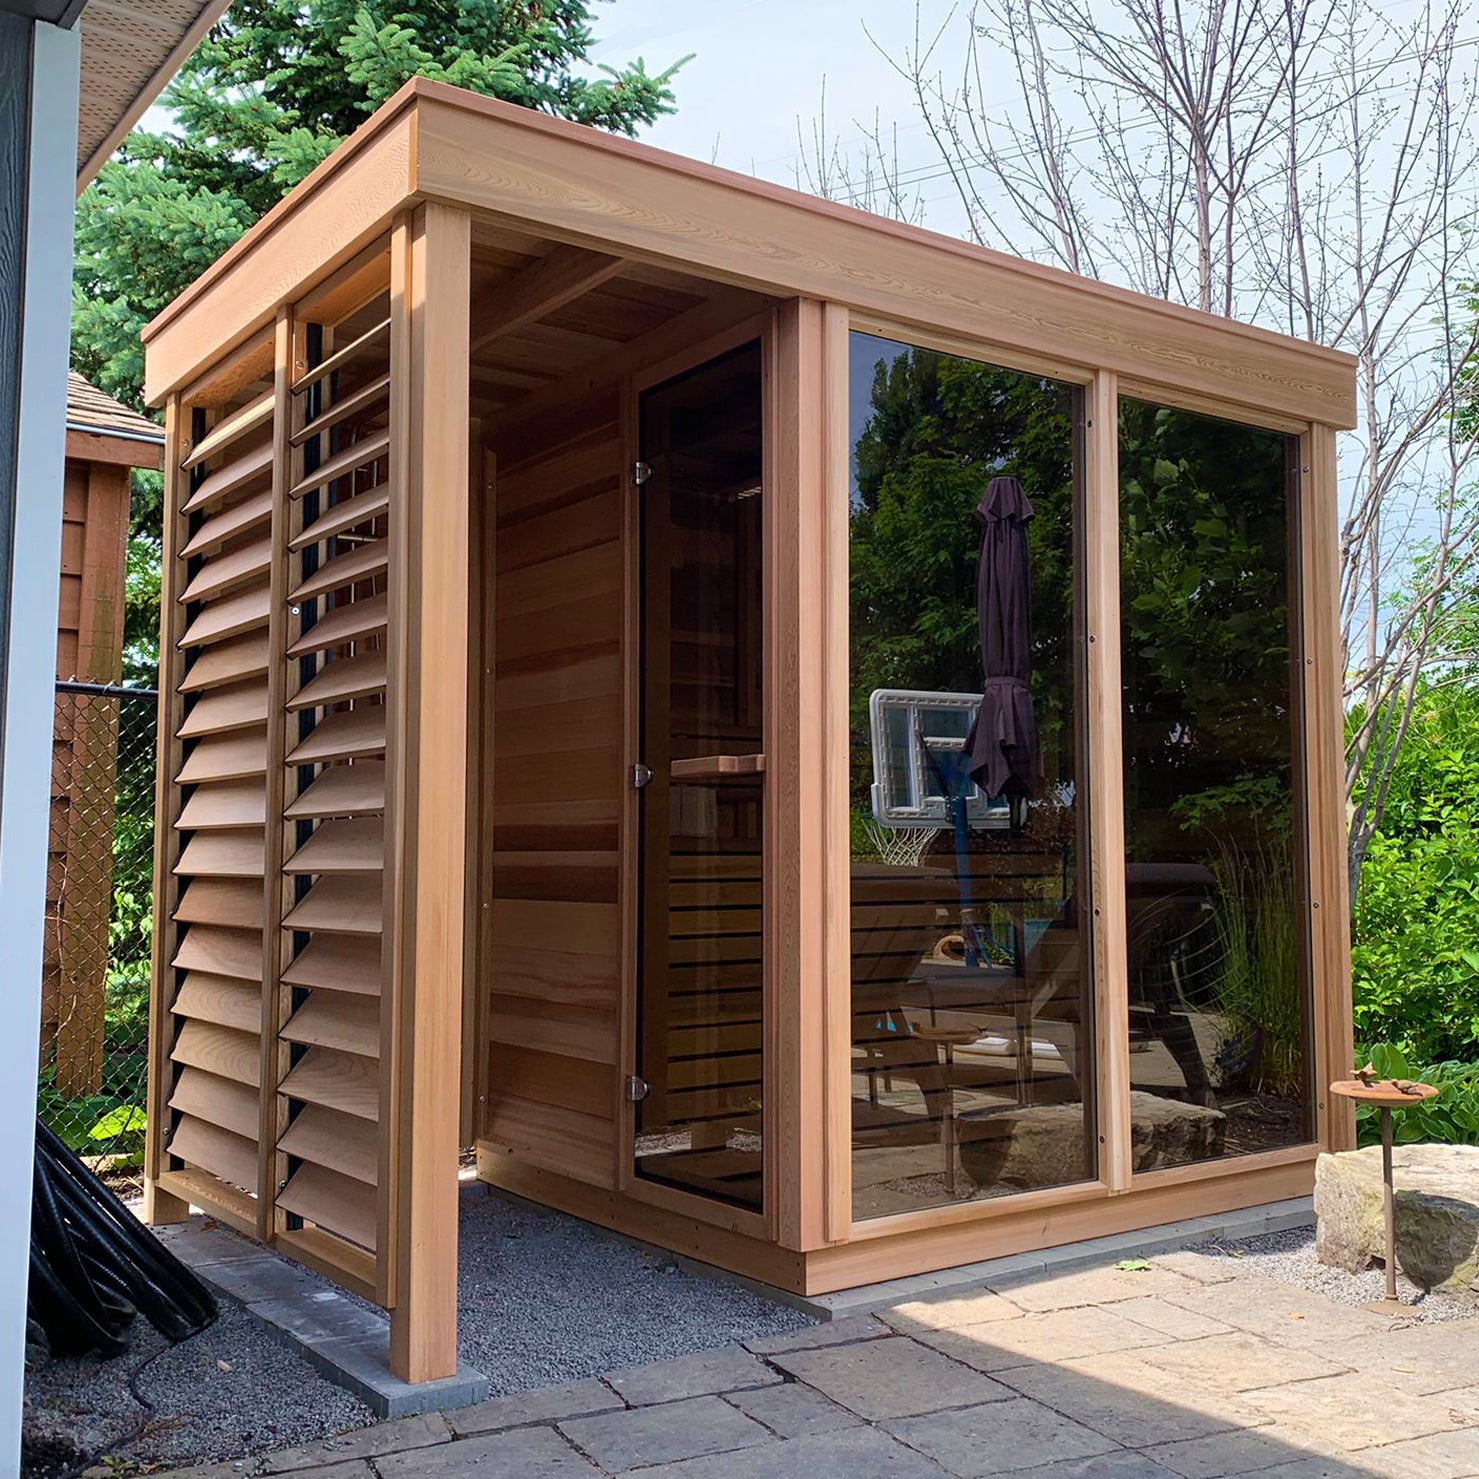 Modern Box OUTDOOR Sauna with Shower in the Back Yard